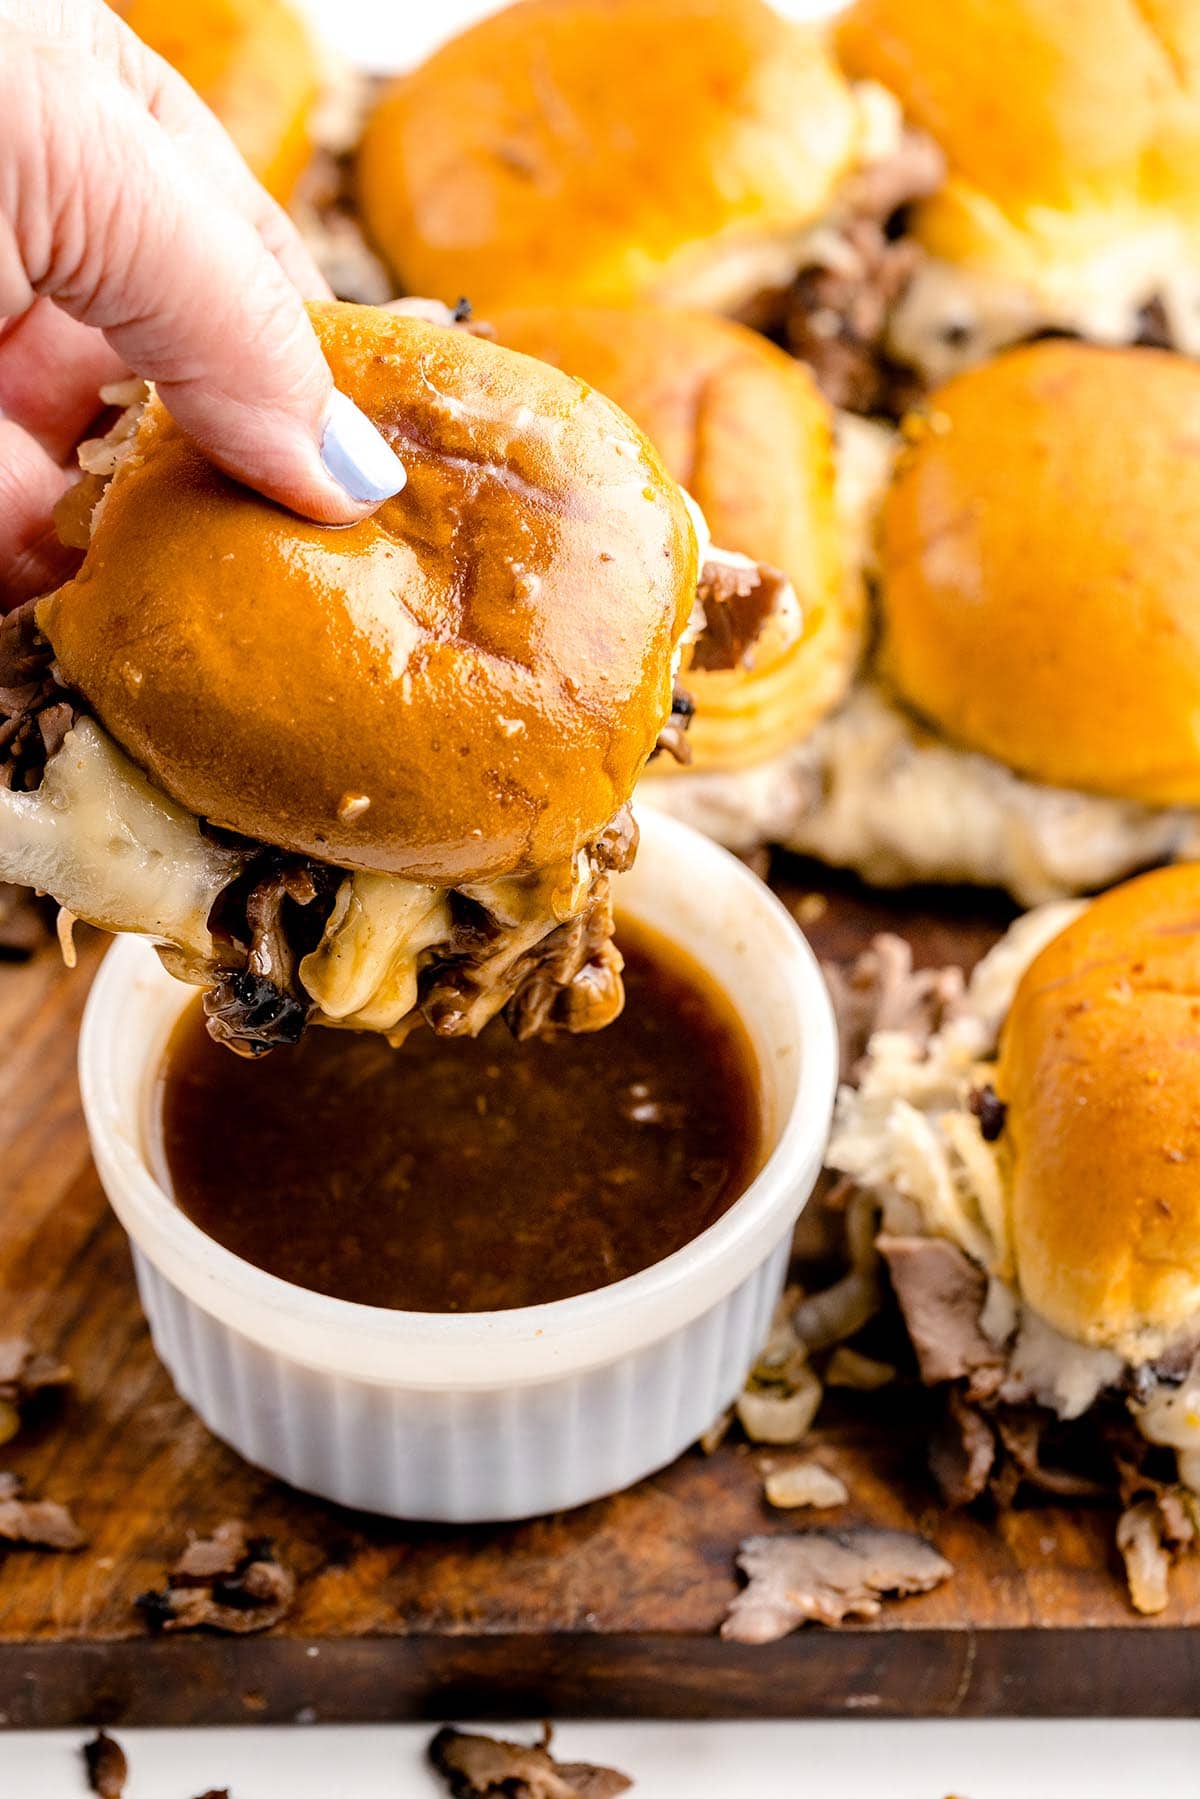 dipping the sliders into a bowl of sauce